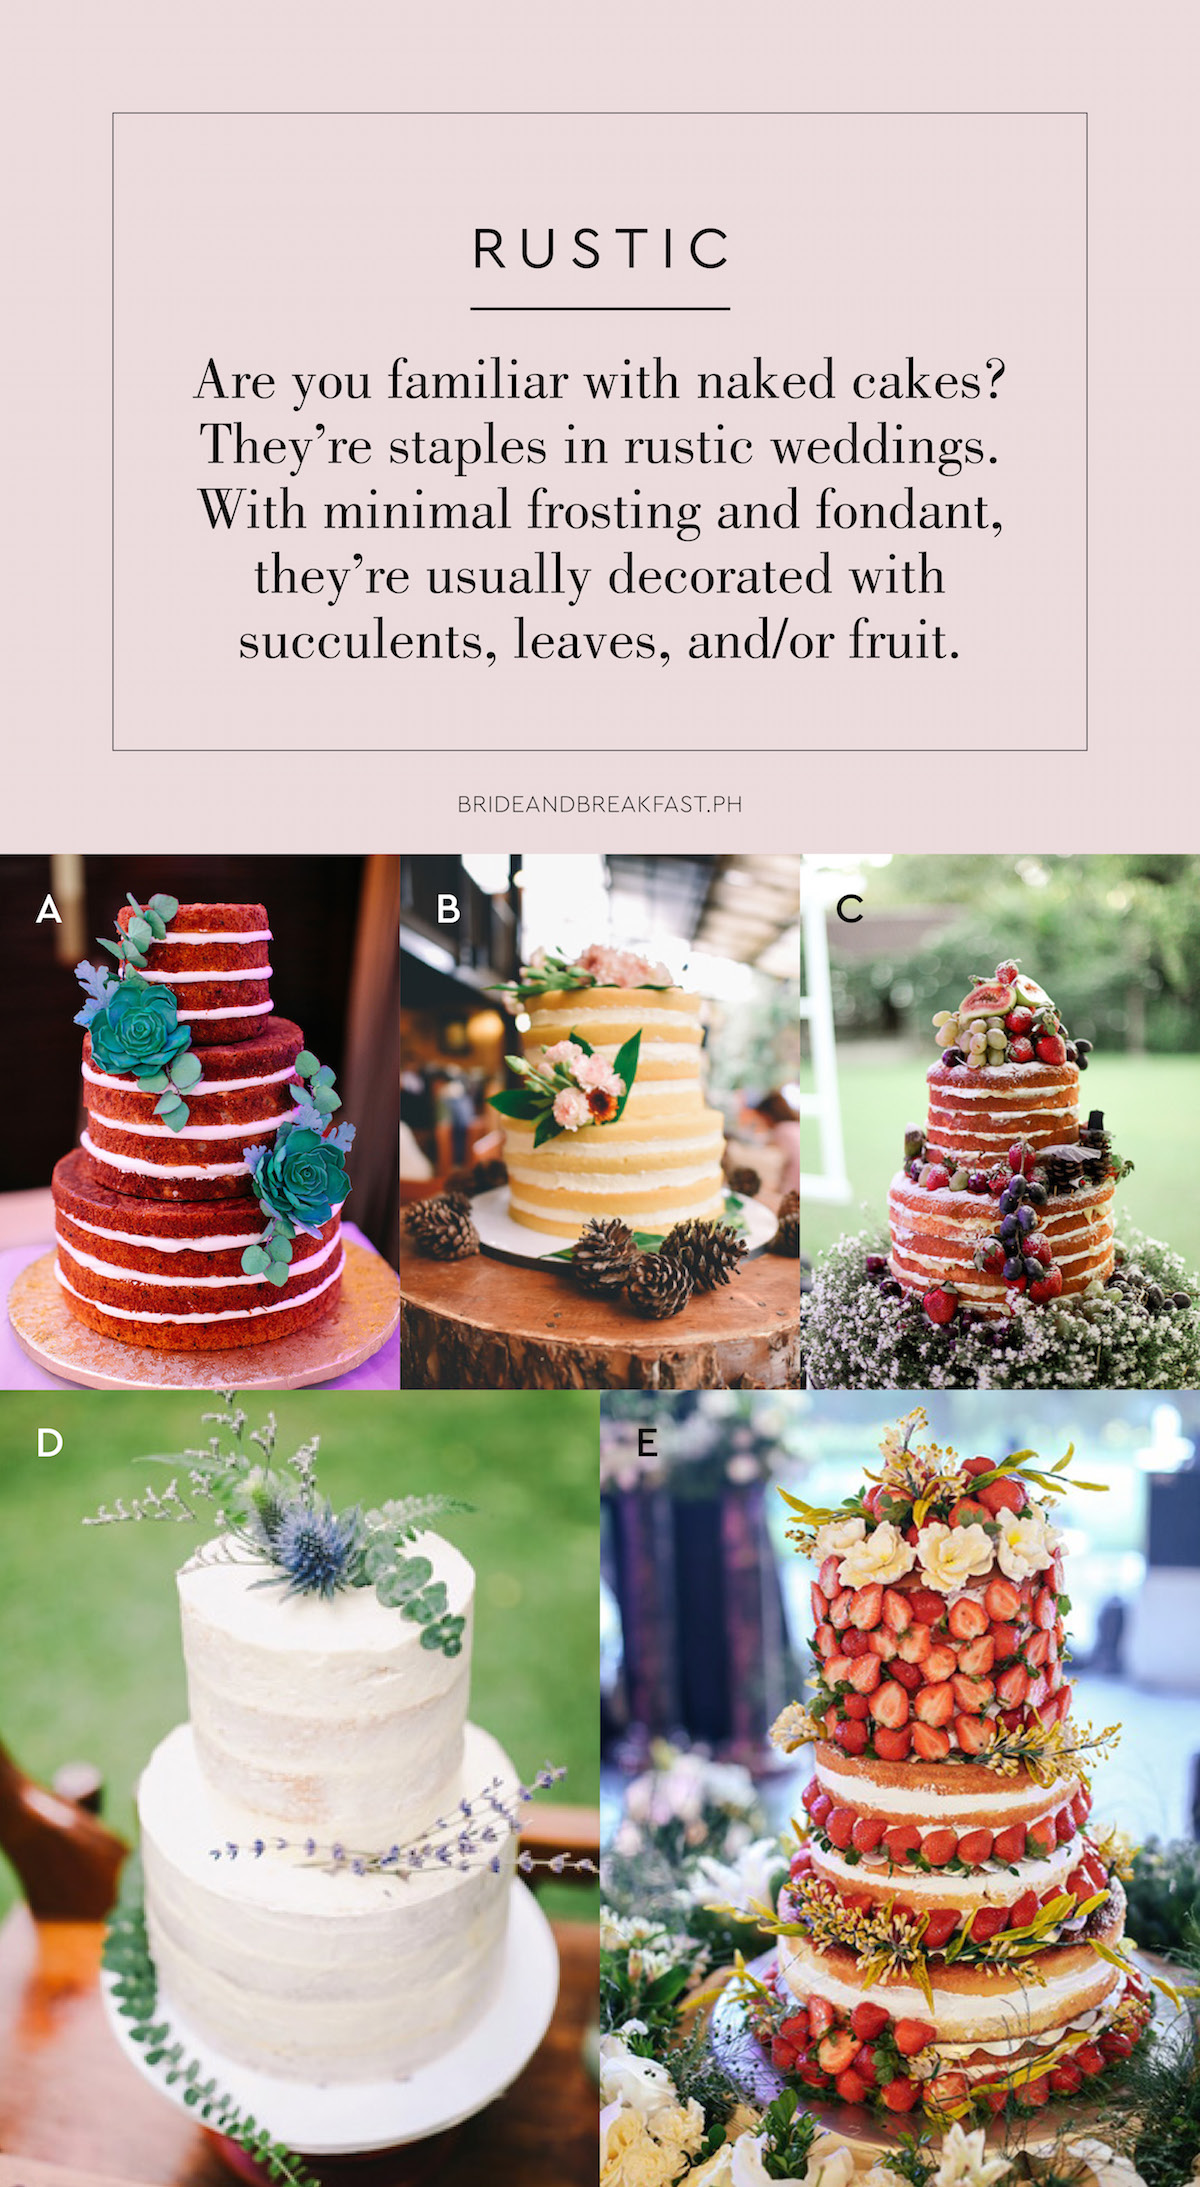 RUSTIC Are you familiar with naked cakes? They're staples in rustic weddings. With minimal frosting and fondant, they're usually decorated with succulents, leaves, and/or fruit.